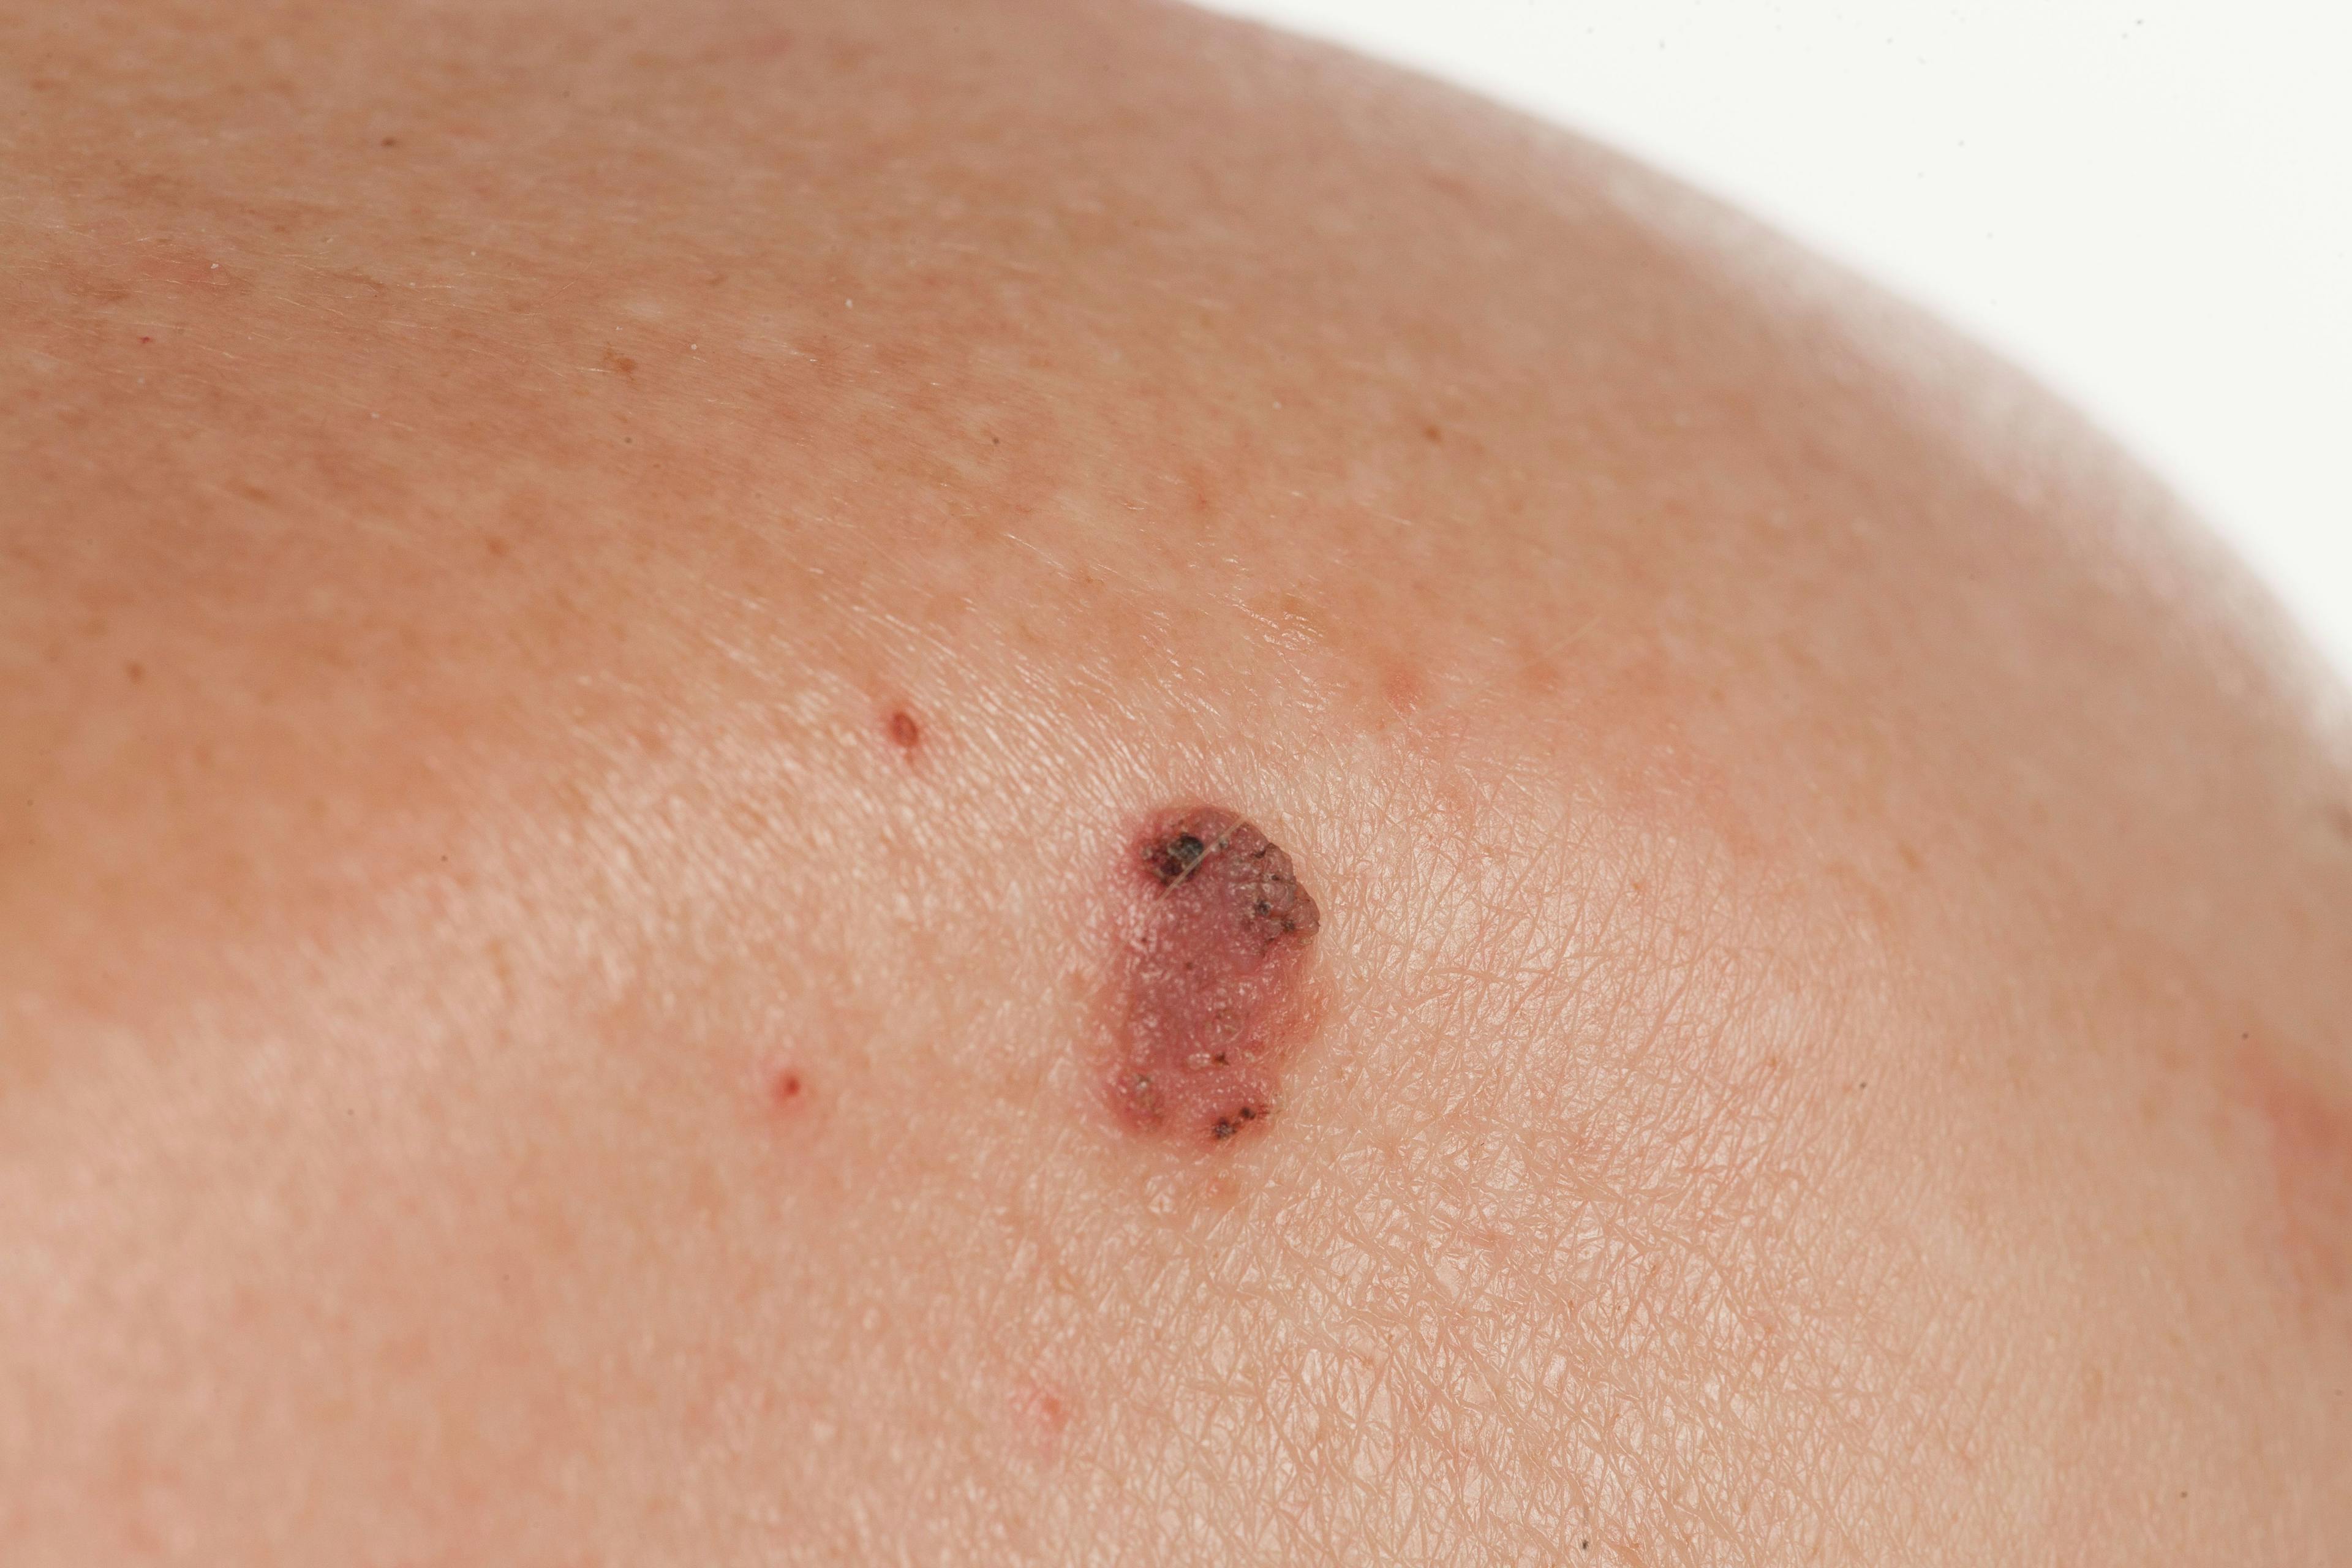 Phase I/II Study of Topical Biologic Shows Positive Results for the Treatment of Basal Cell Carcinoma